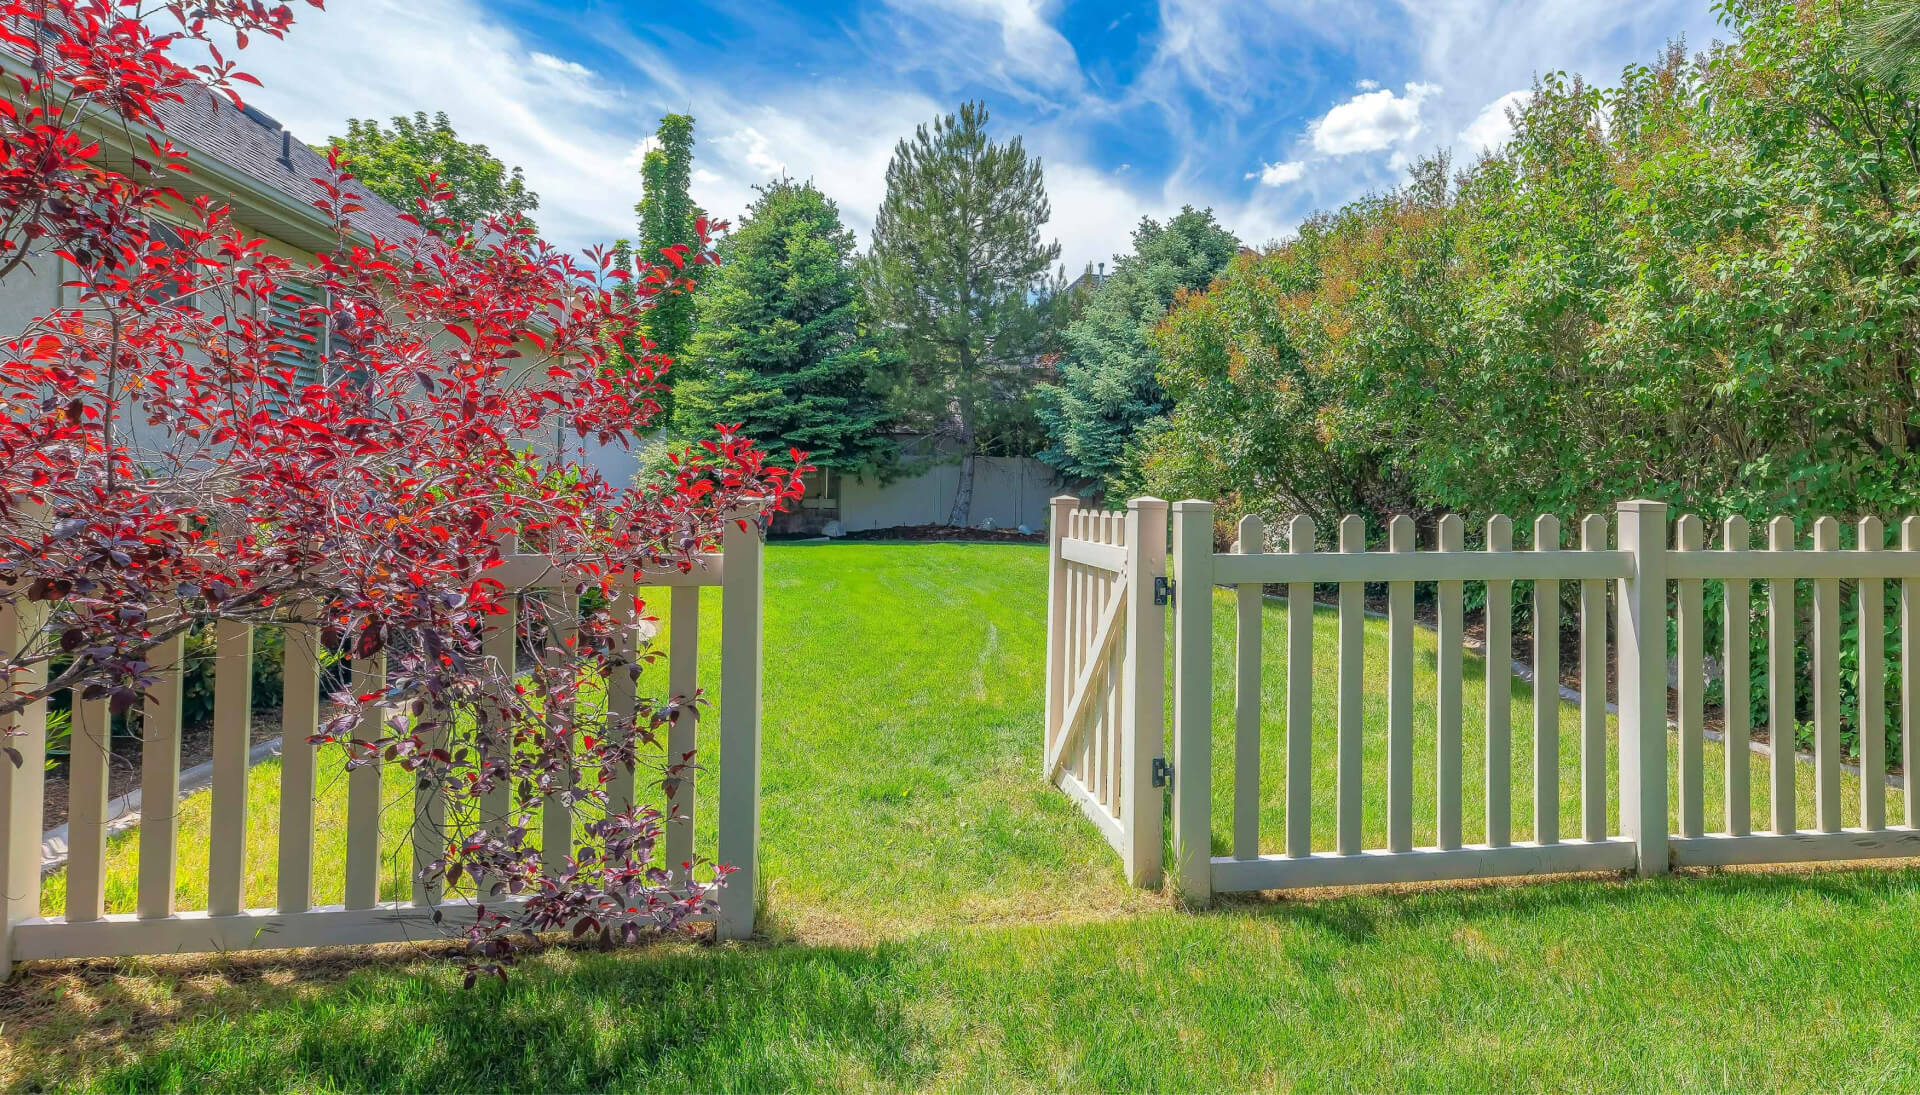 Fence gate installation services in Naples